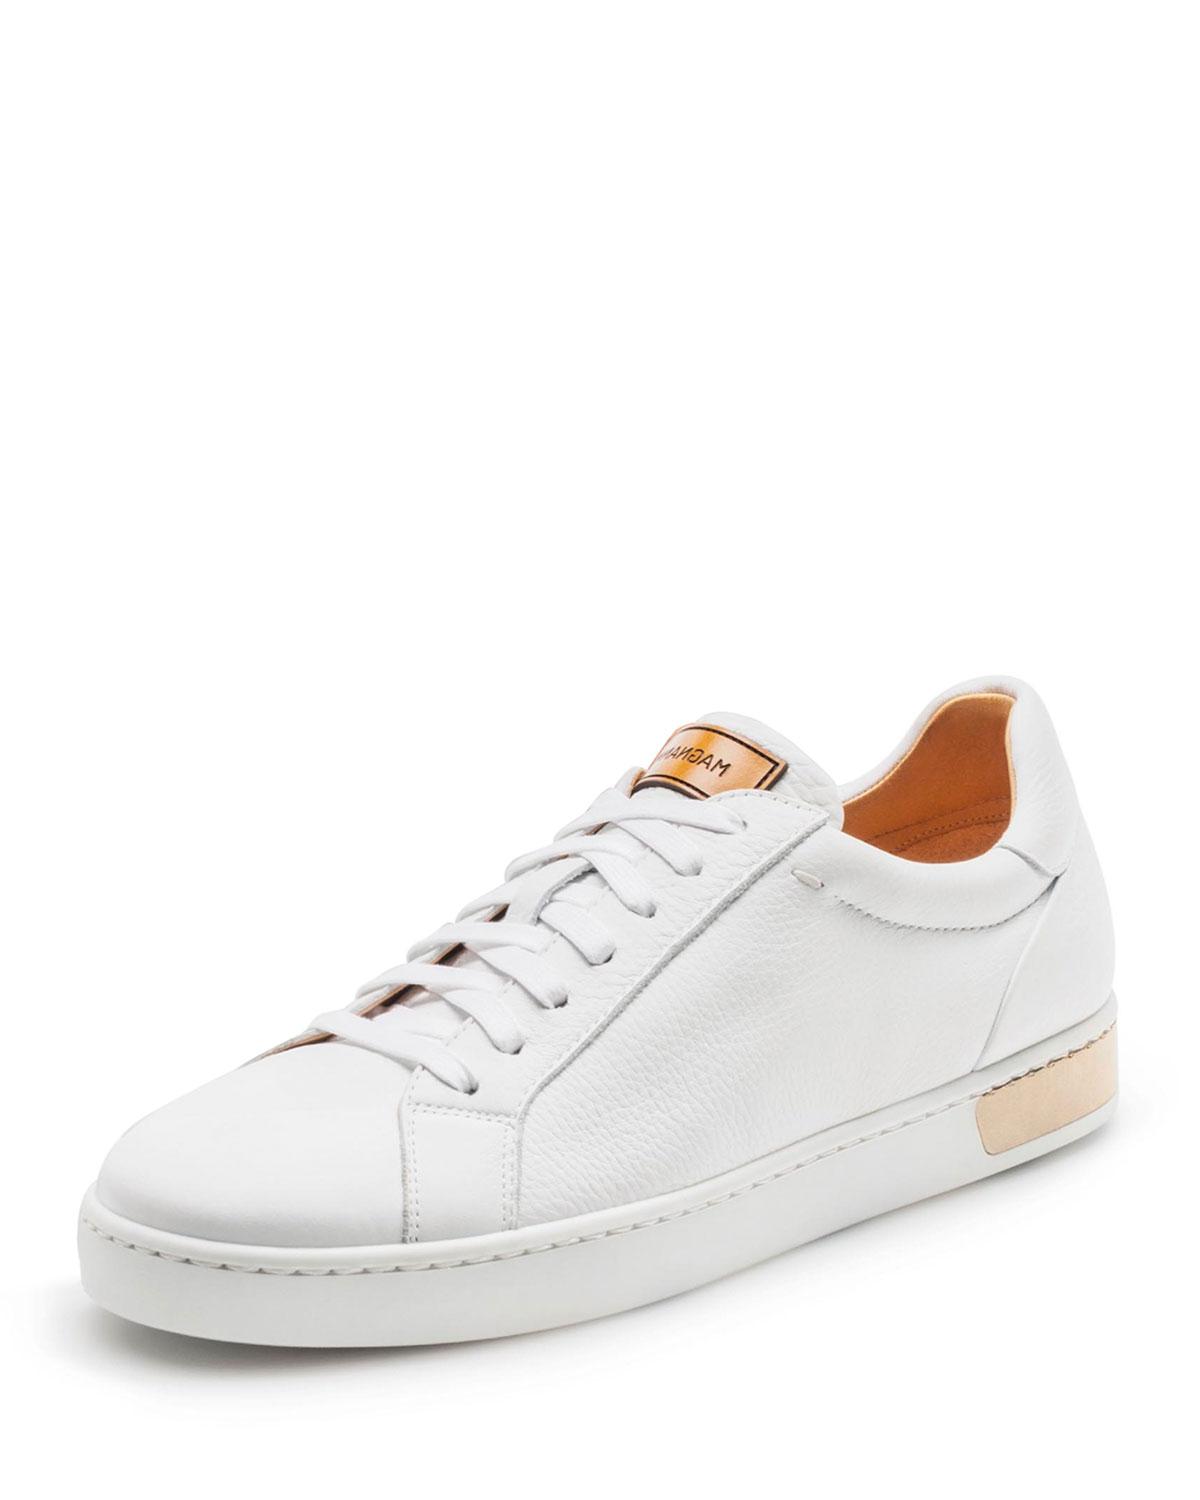 Magnanni Men's Boltan Caballero Leather Low-top Sneakers in White for ...